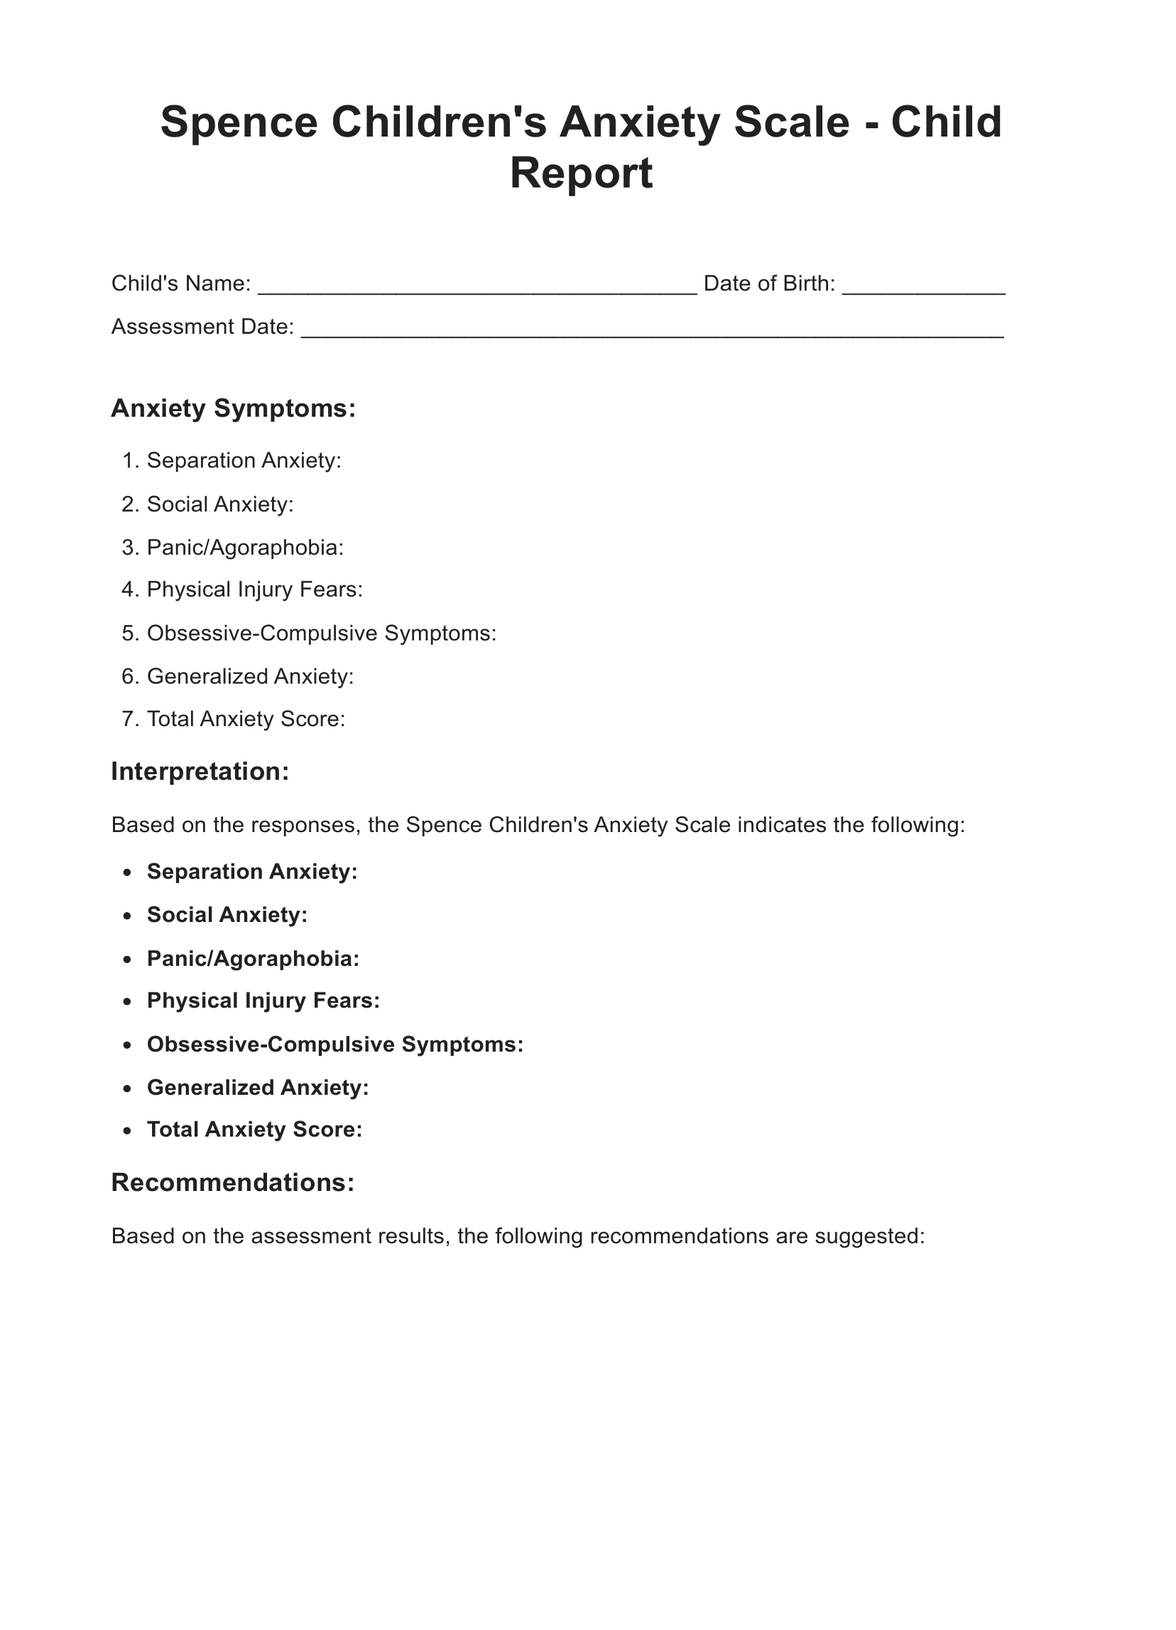 Spence Children's Anxiety Scale - Child Report PDF Example